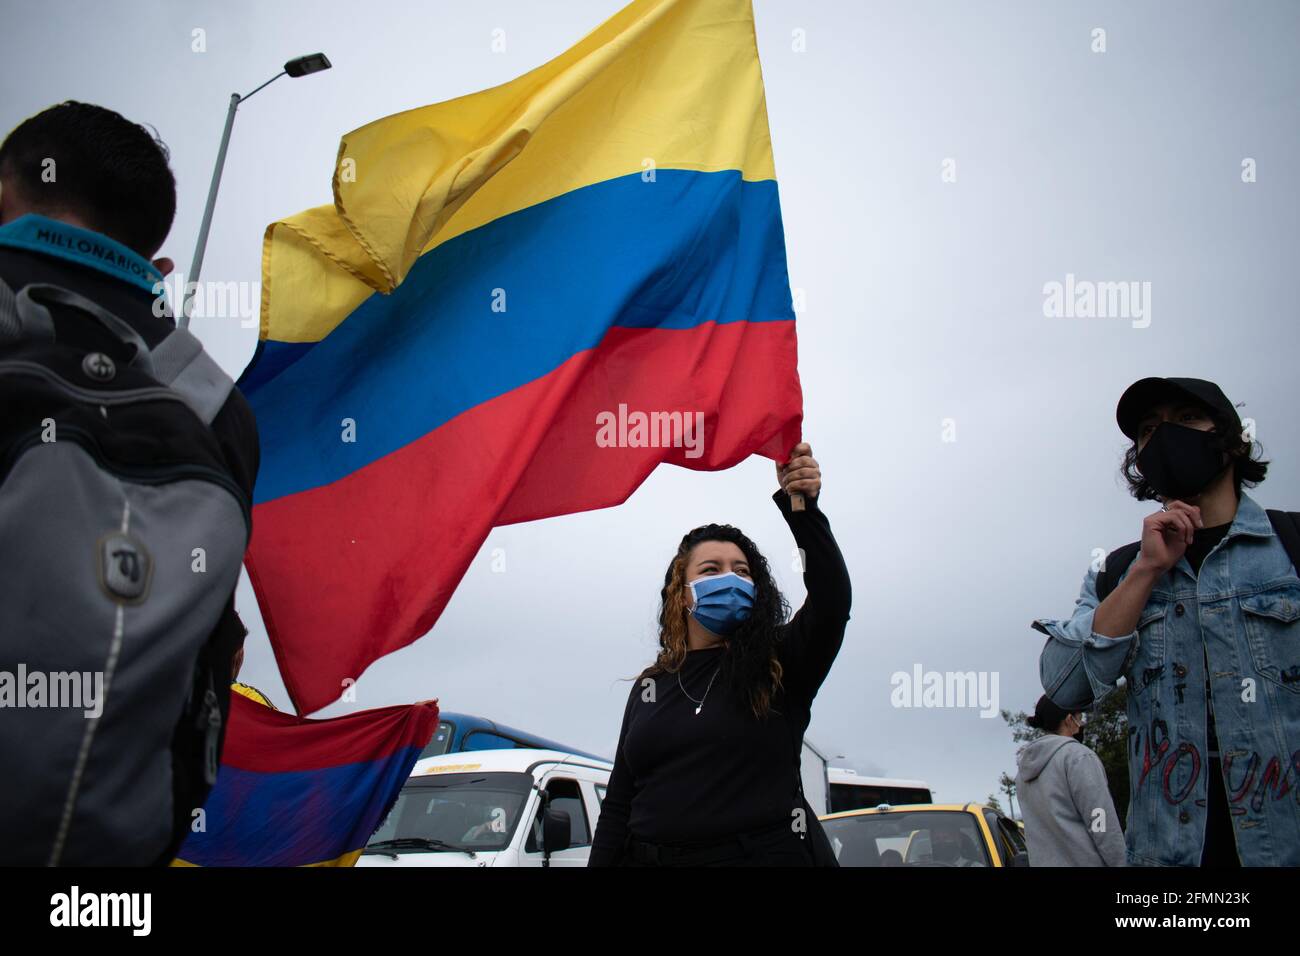 Bogota, Colombia, May 10, 2021, Demonstrators with Colombian flags participate in a protest as Bogota faces its 13 day of anti-government protests against the Health Reform and Police Brutality cases that rise to over 30 dead across the country since the National Strike begun. In Bogota, Colombia on May 10, 2021 Stock Photo